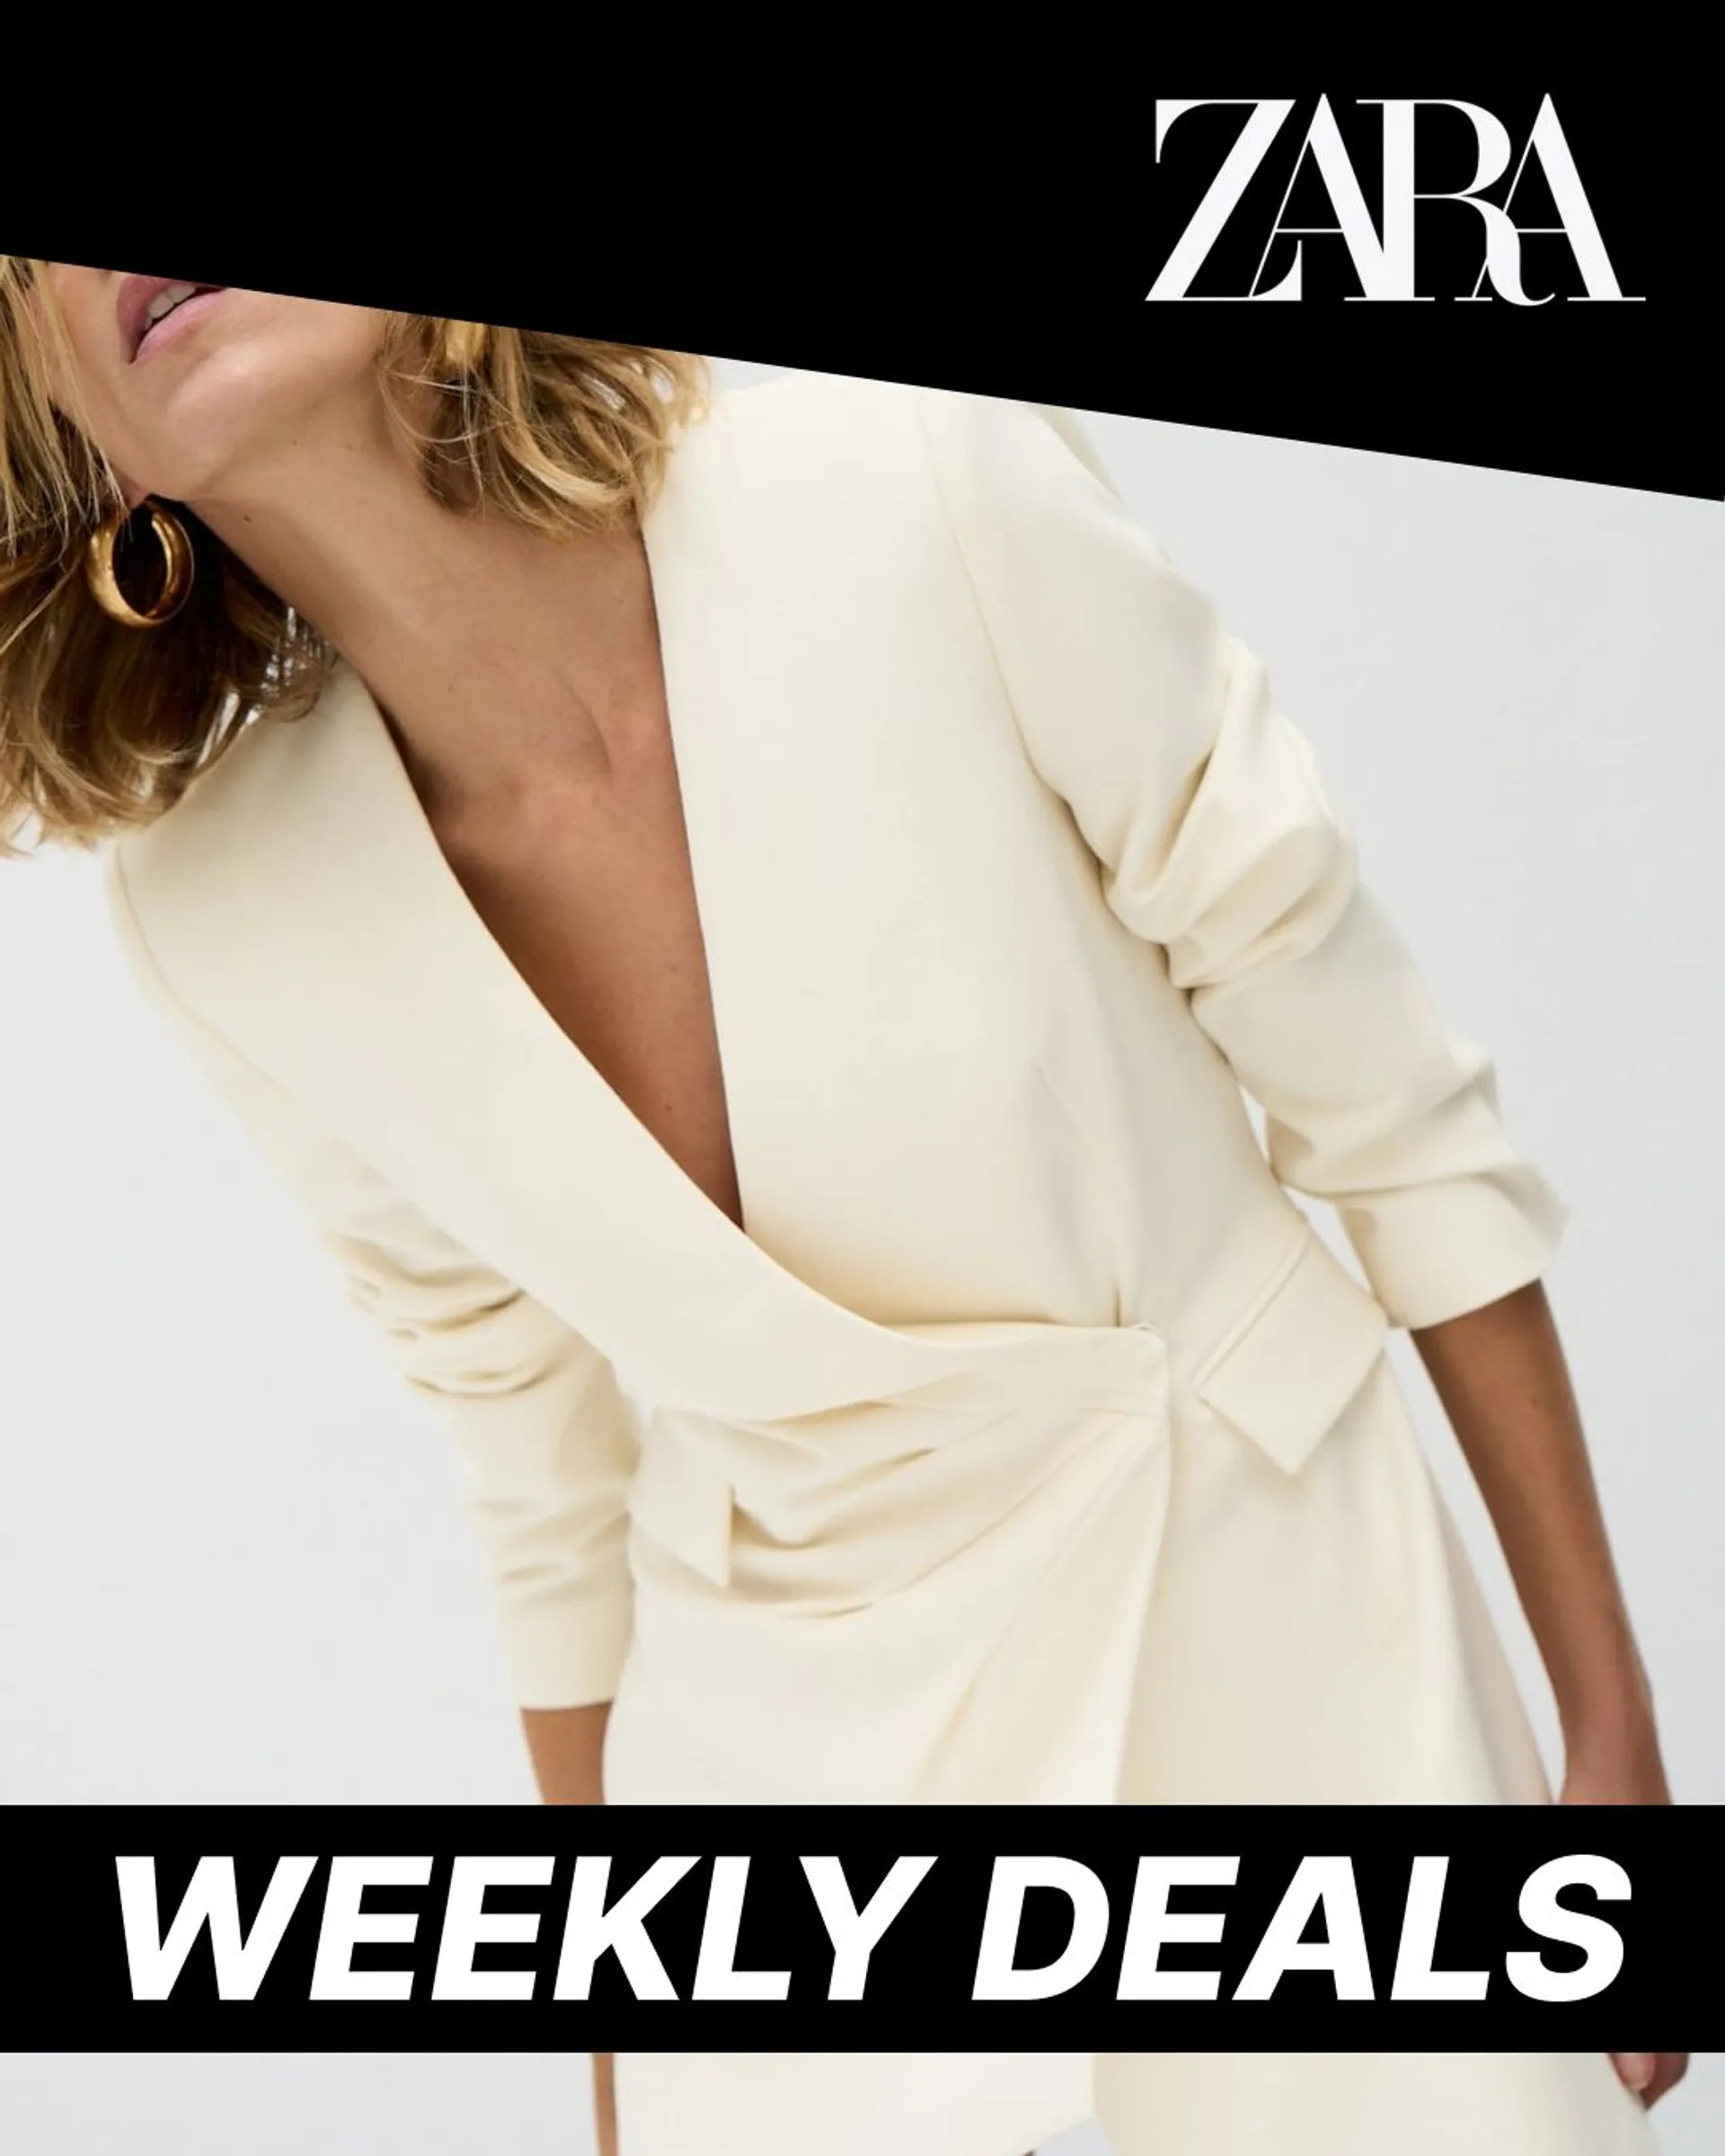 Zara - Special Price! from January 27 to February 1 2023 - flyer page 1